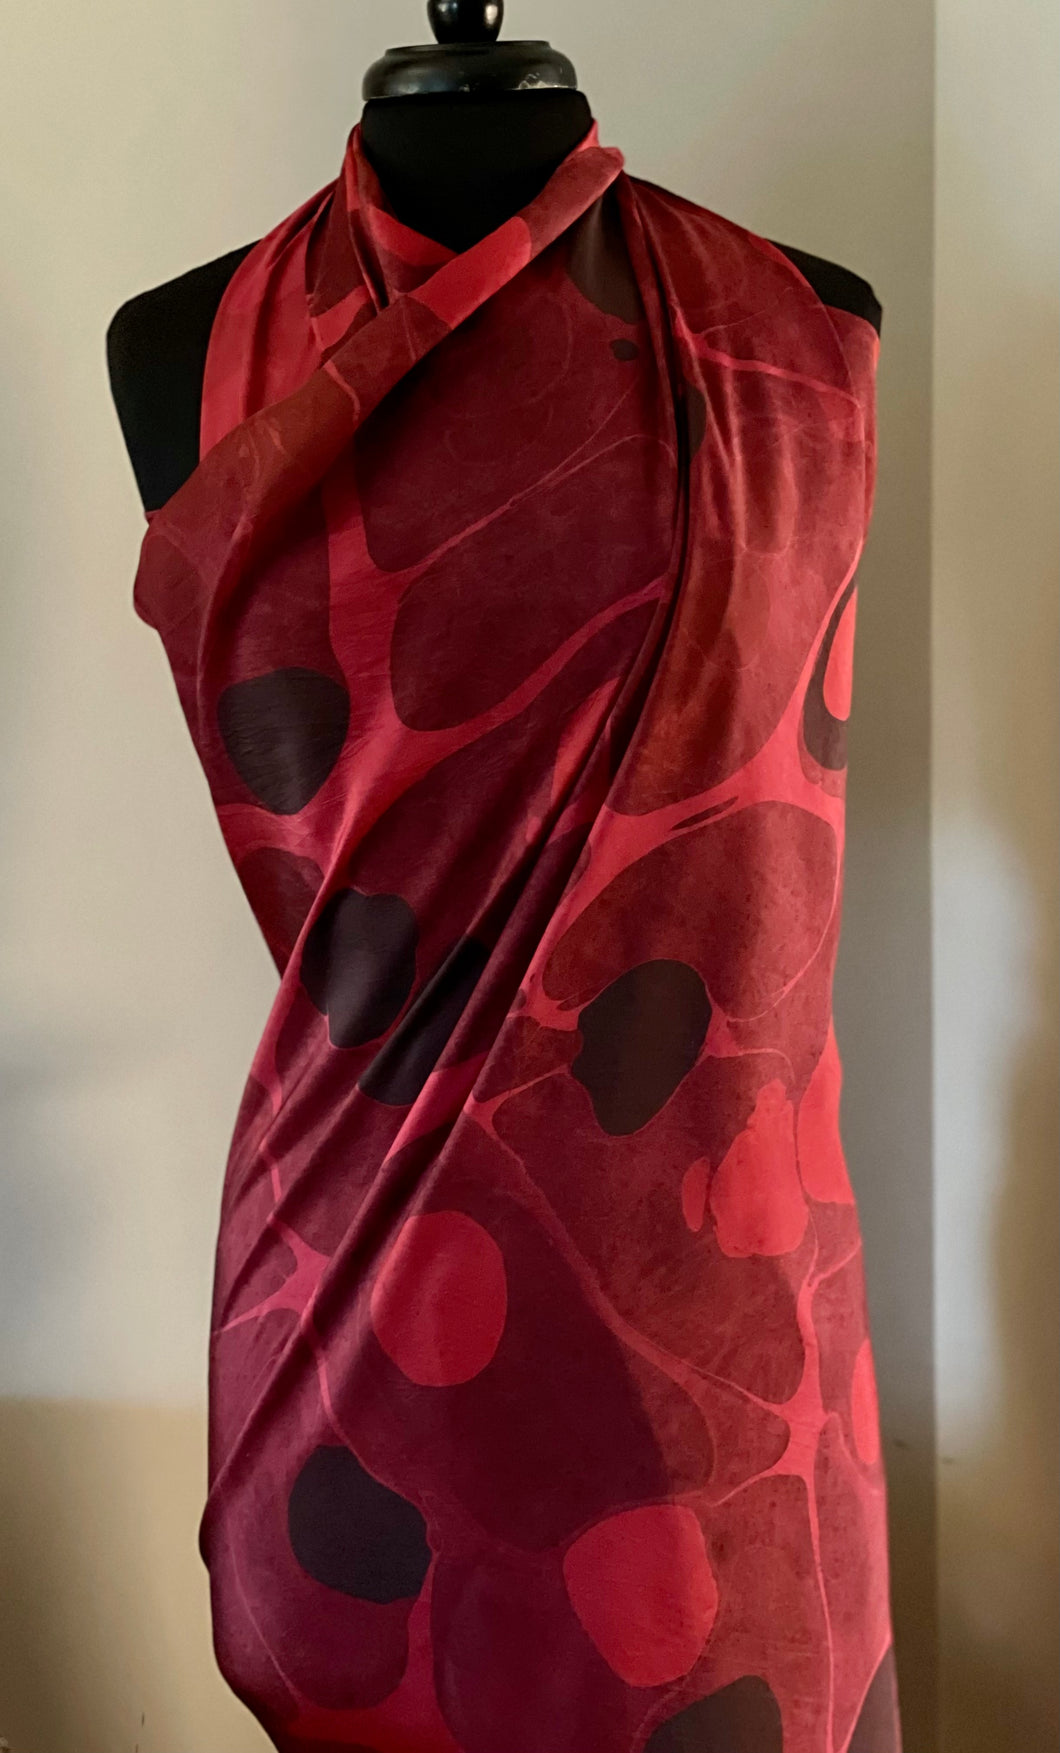 Red Stone Sarong Wrap 44x69 water marbled Habotai Silk combed